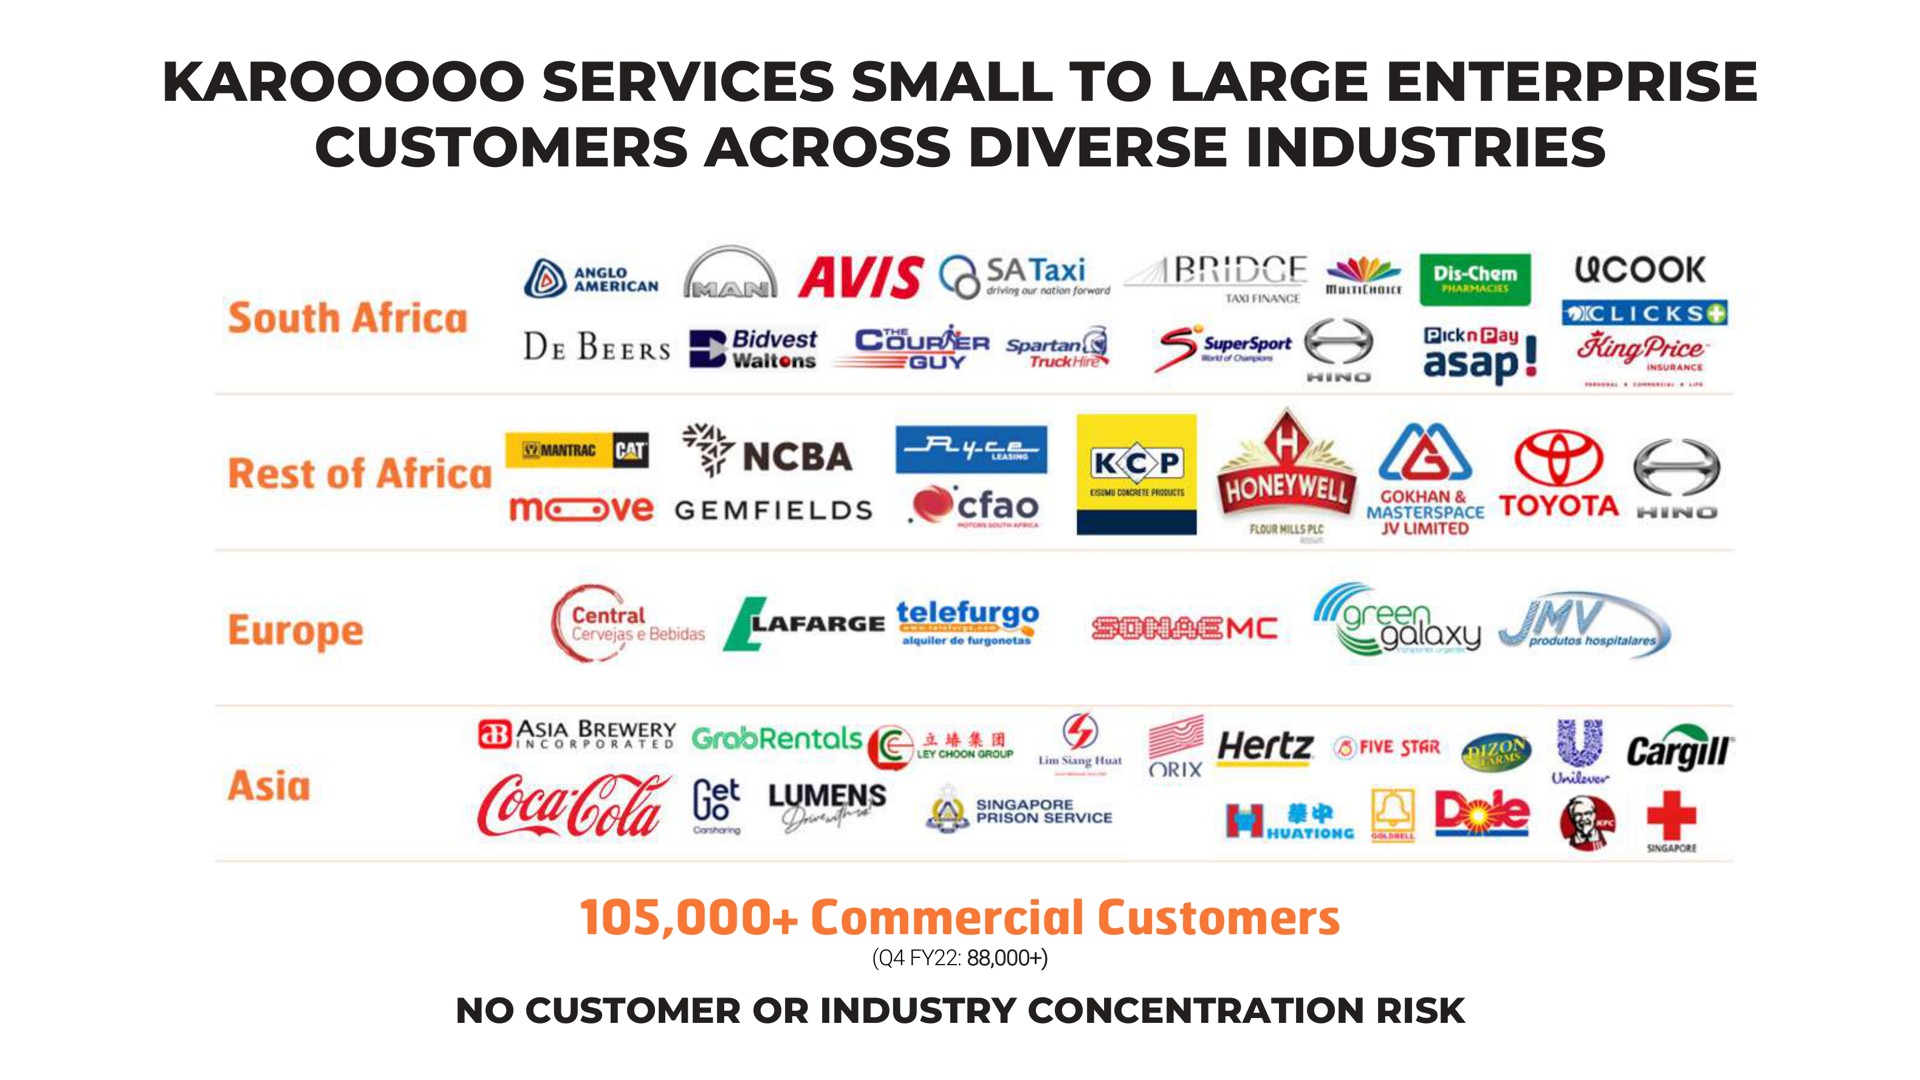 services small to large enterprise customers across diverse industries came a cab go dole | Karooooo